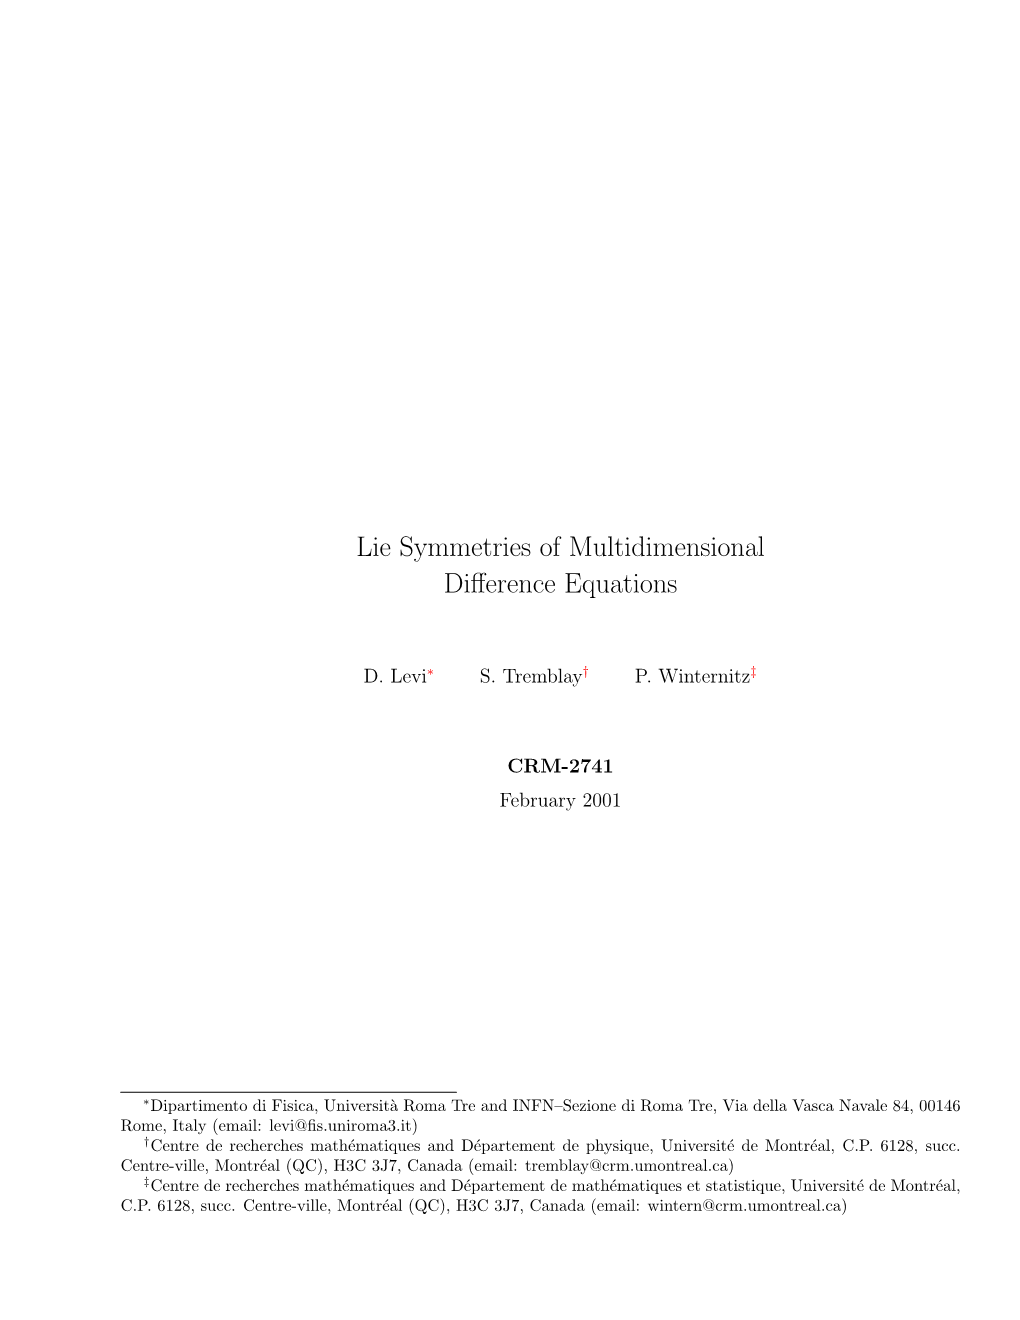 Lie Symmetries of Multidimensional Difference Equations